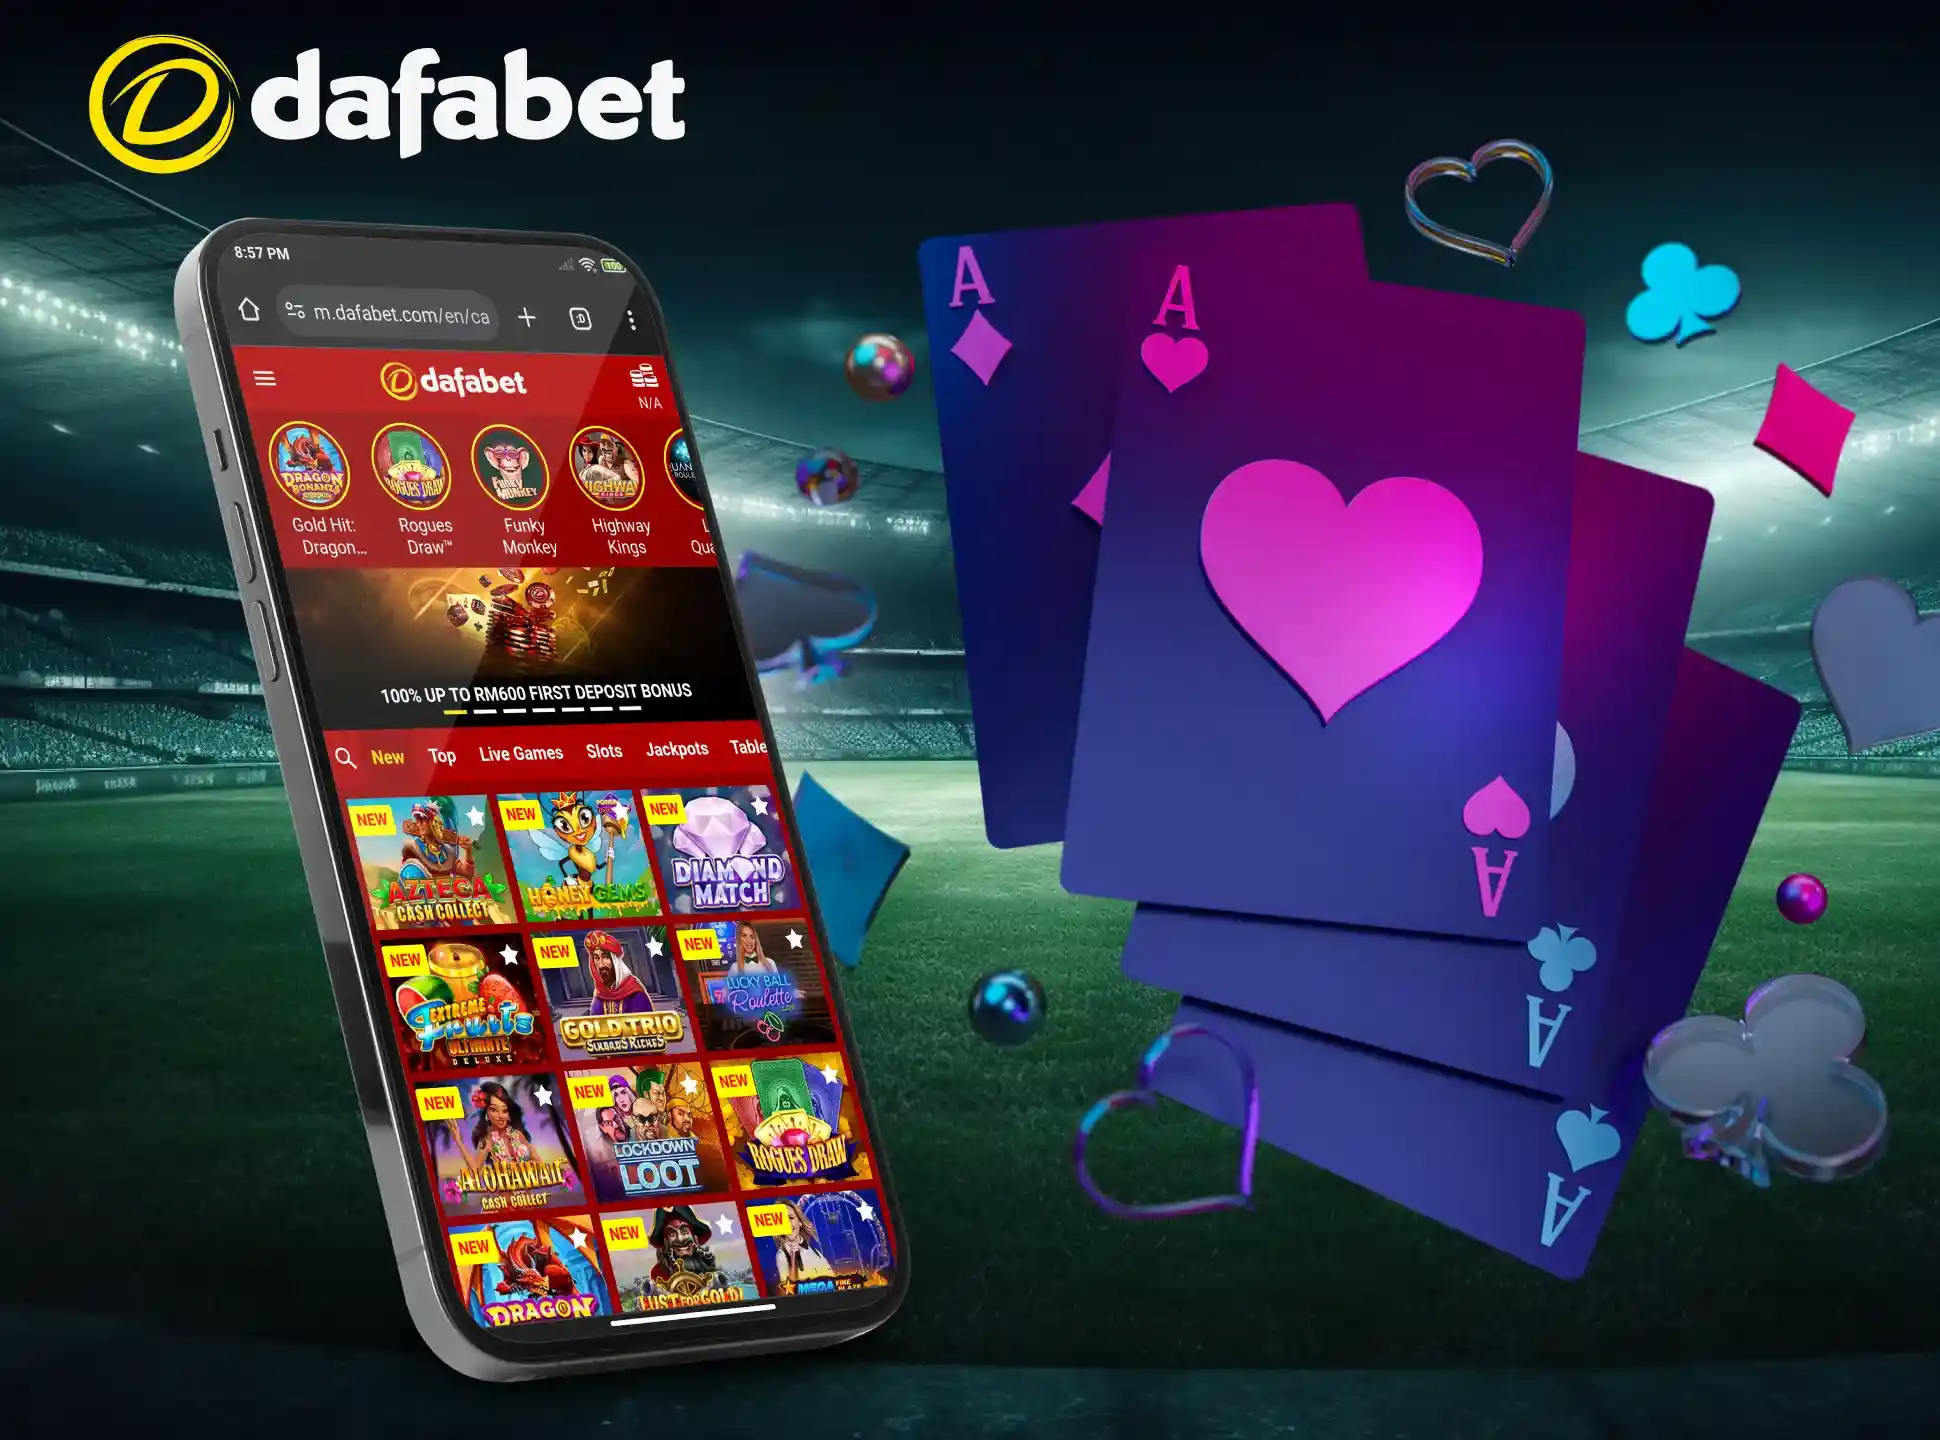 Choose your favorite games at Dafabet Casino and get a chance to win a significant amount of money.